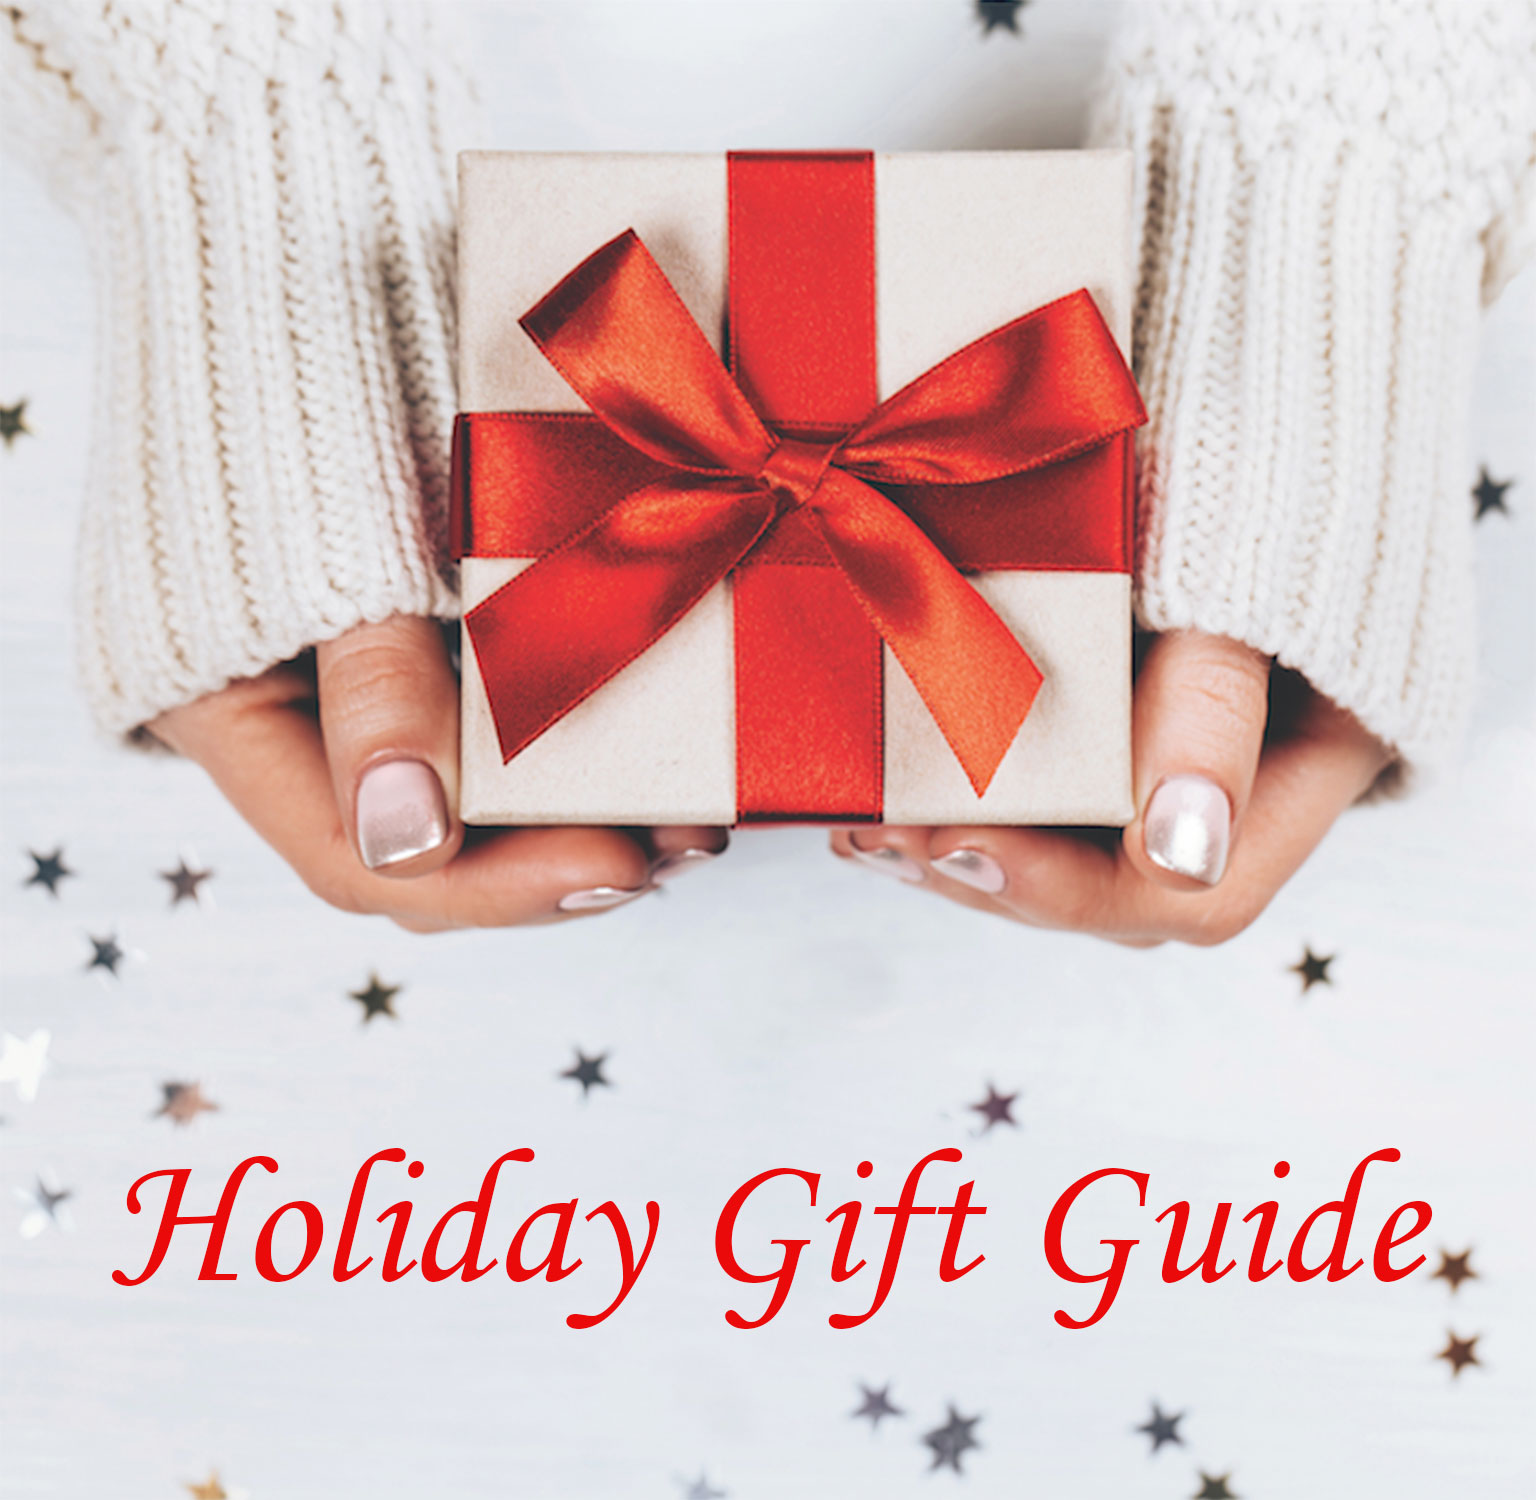 HolidayGiftGuide • Freedom Commons